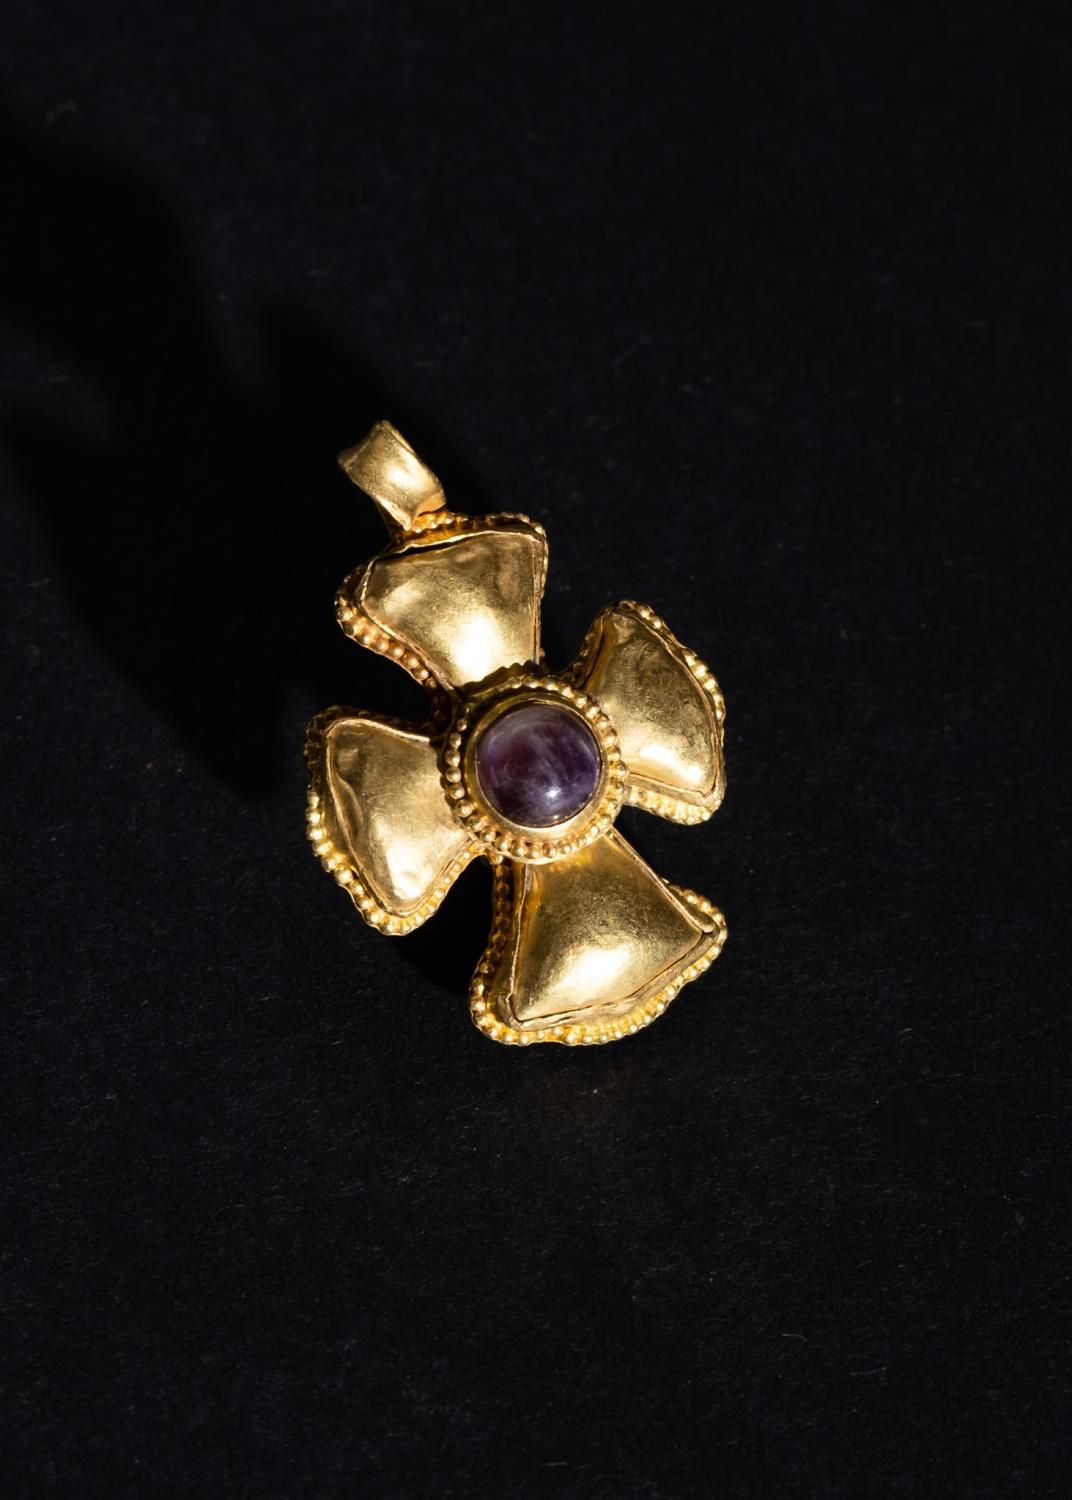 A GOLD BYZANTINE CROSS WITH AN AMETHYST CENTRE STONE, CIRCA 3RD-5TH CENTURY BYZA&hellip;